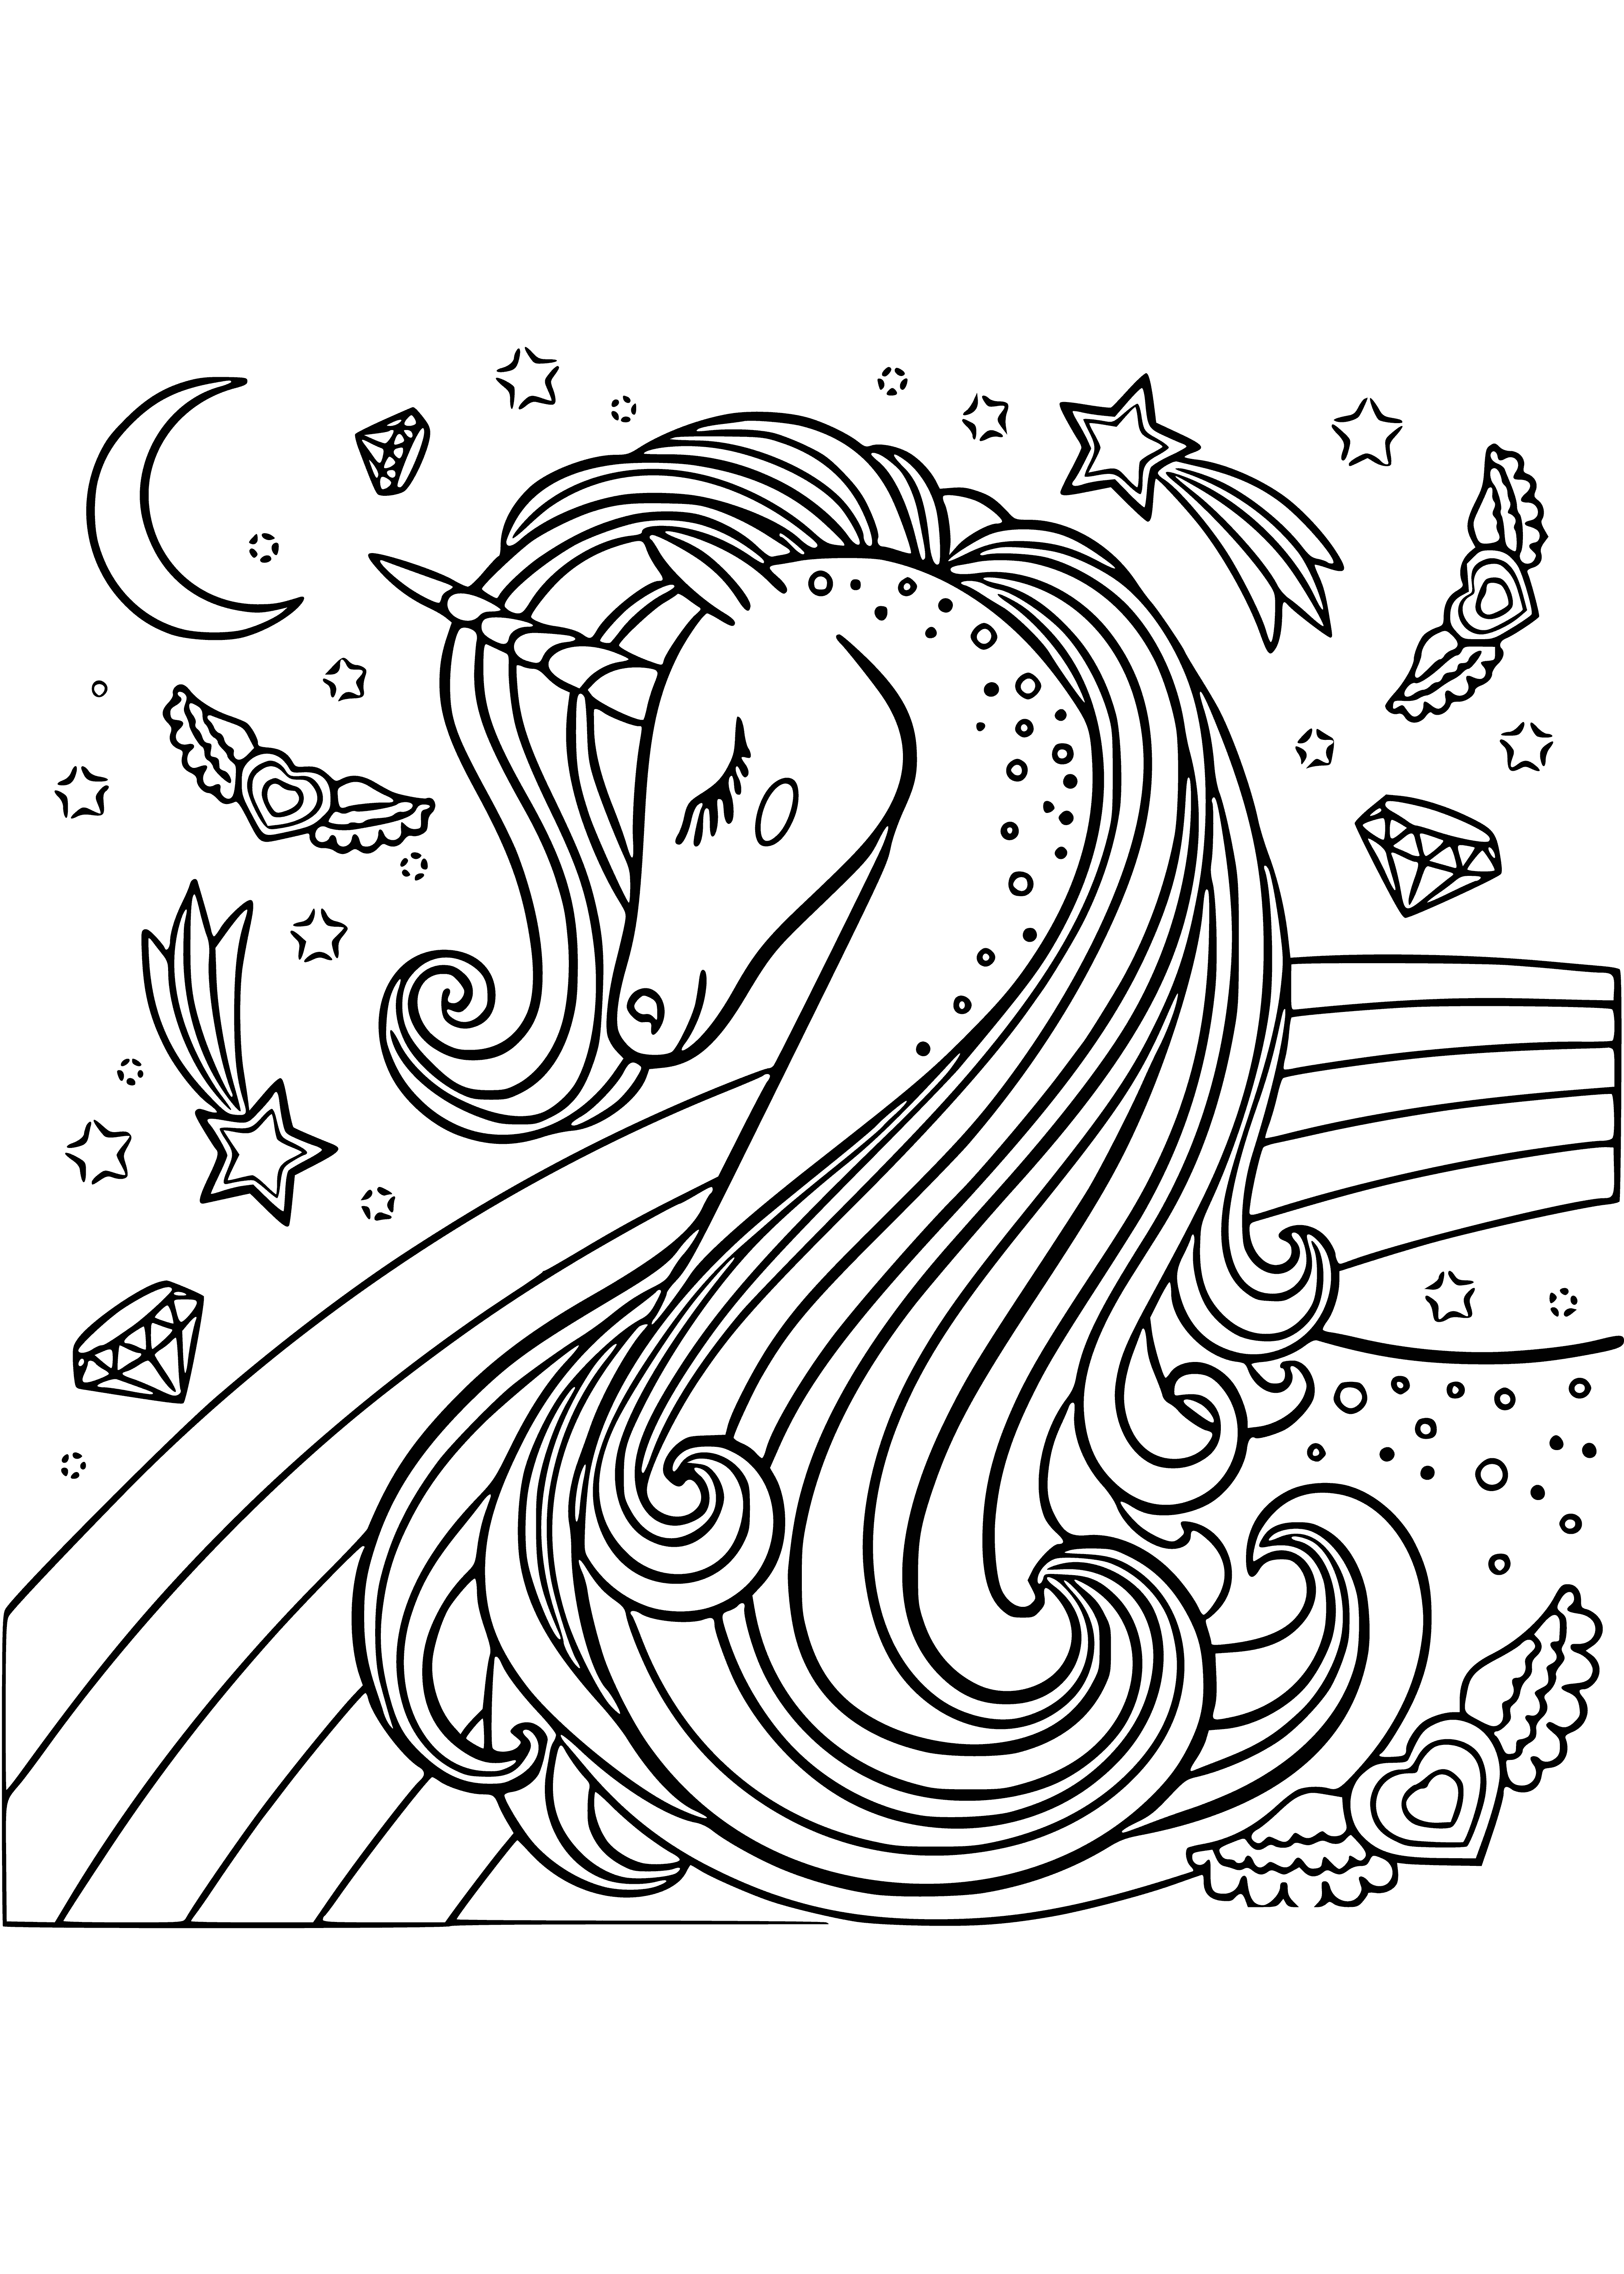 Unicorn in love coloring page